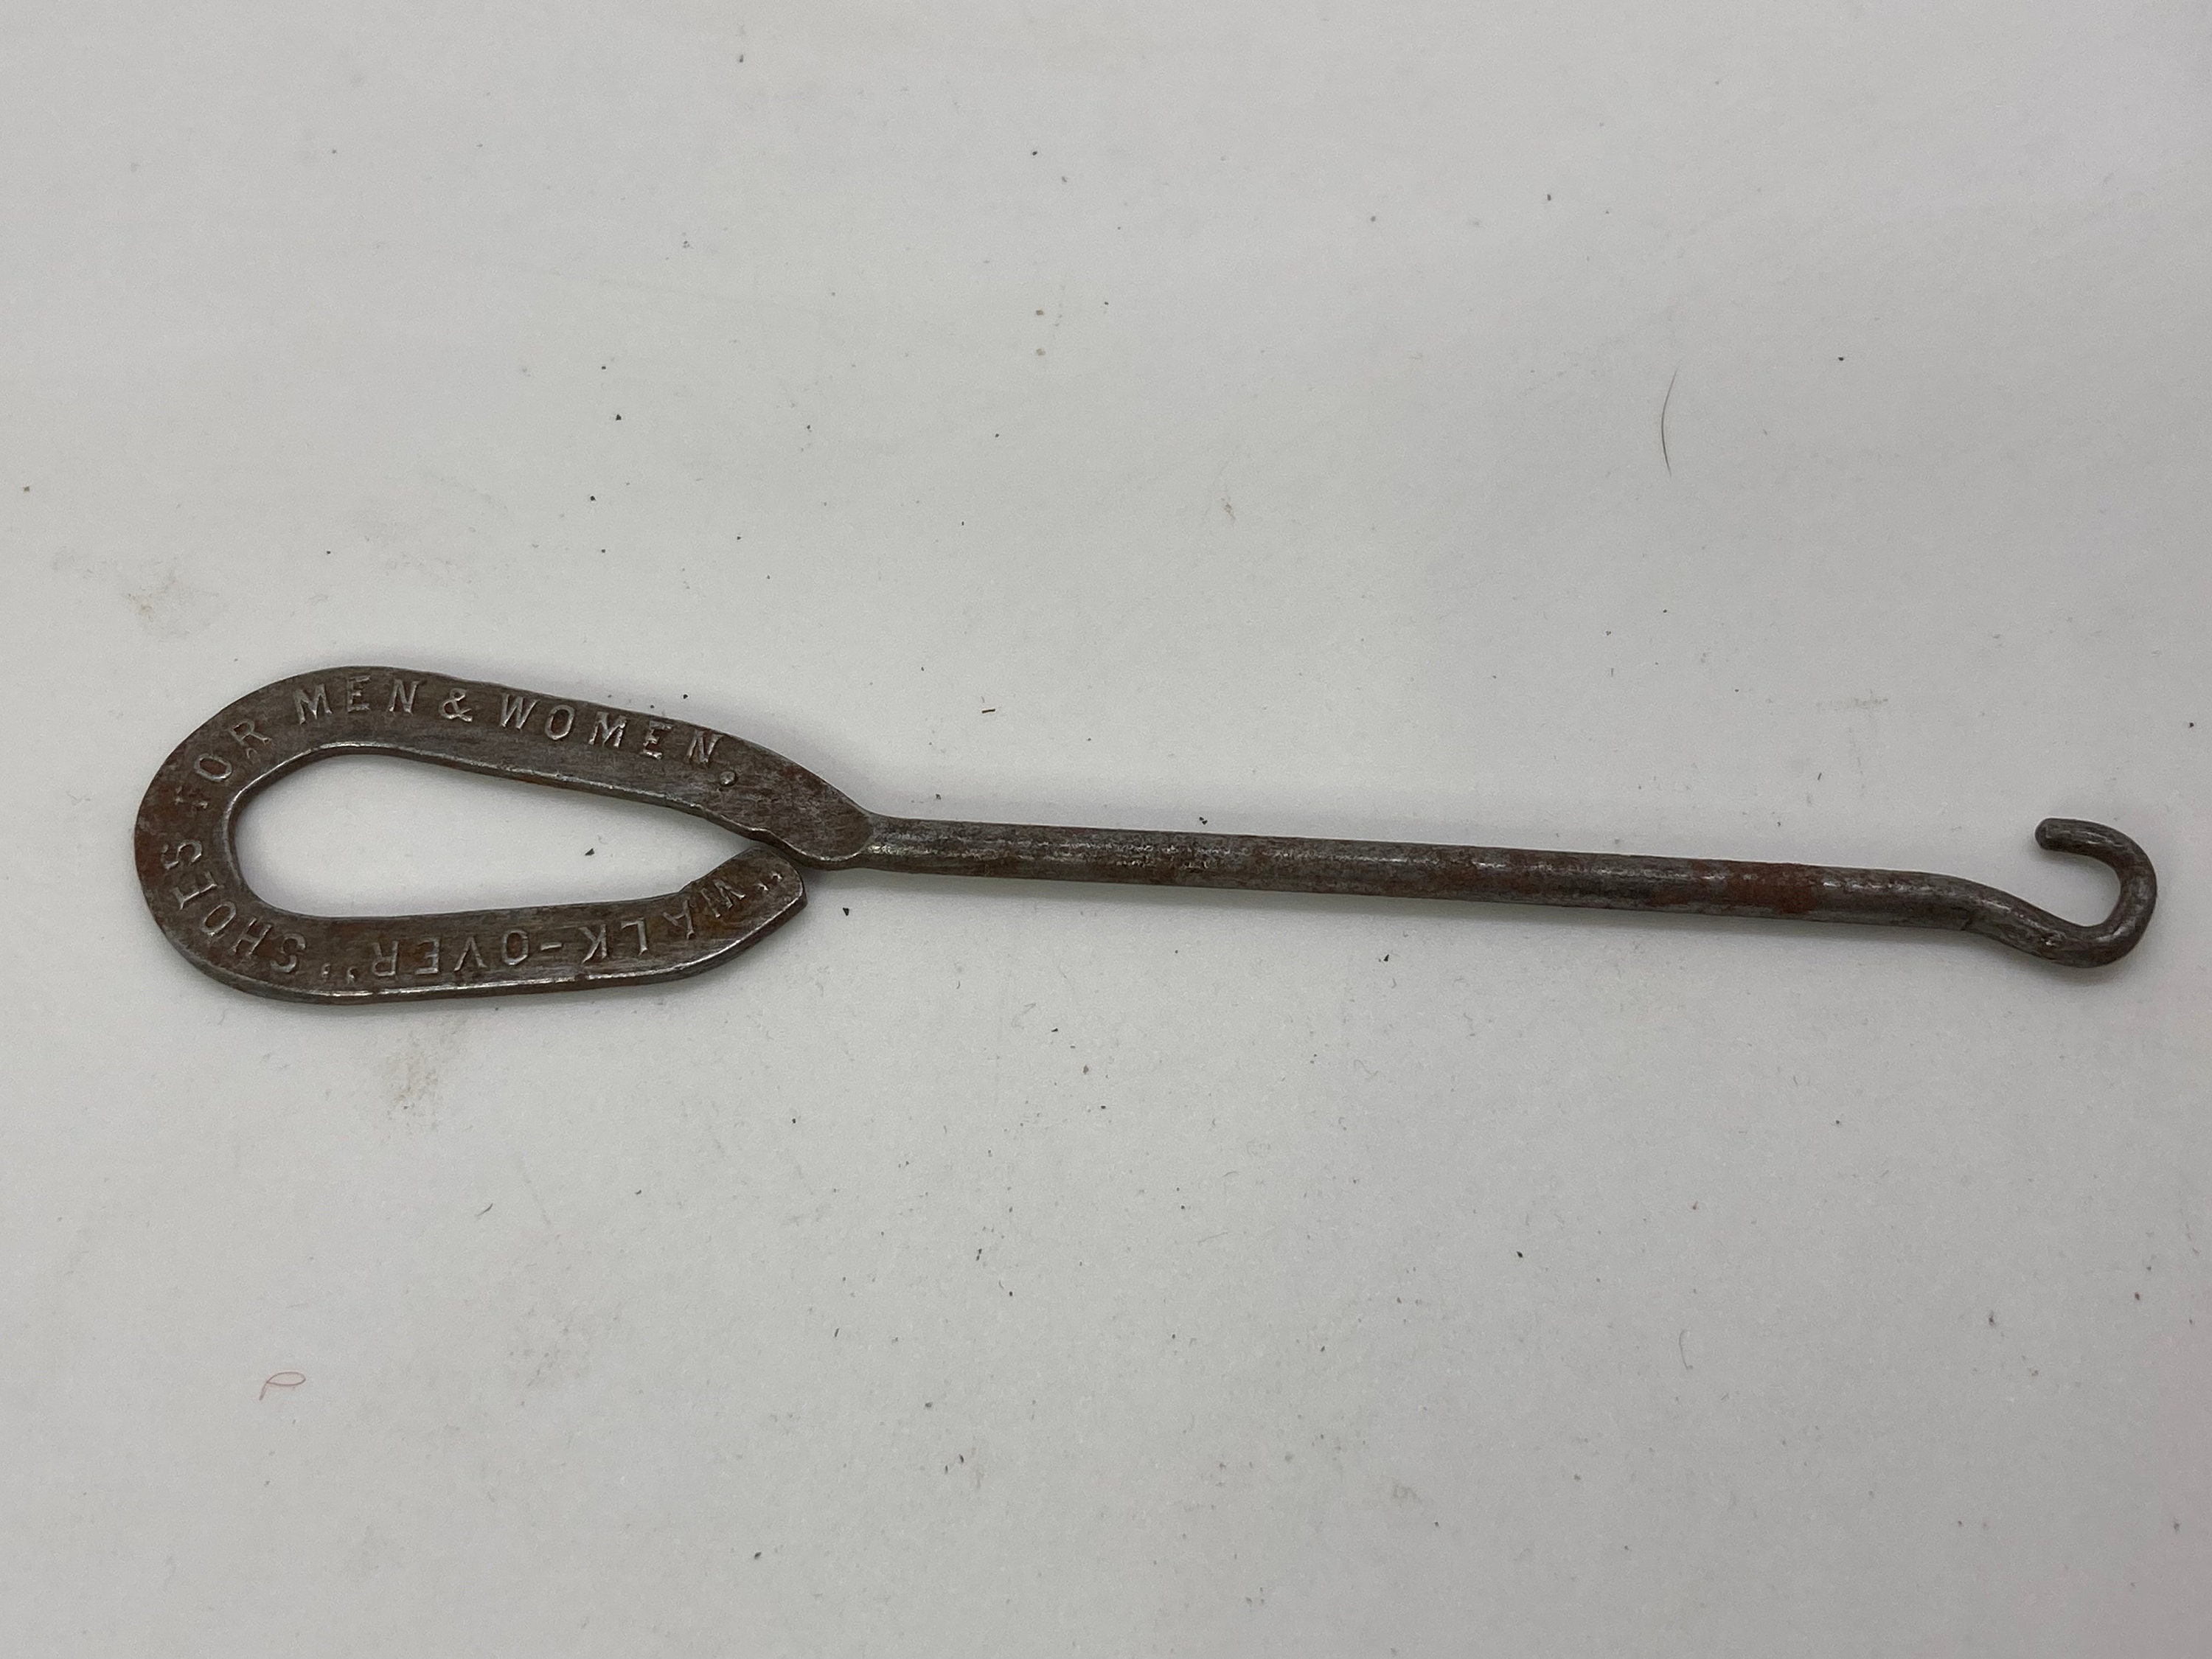 Antique Wieting Shoe Store Shoe Button Hook Tool 3-5/8 Long Syracuse NY